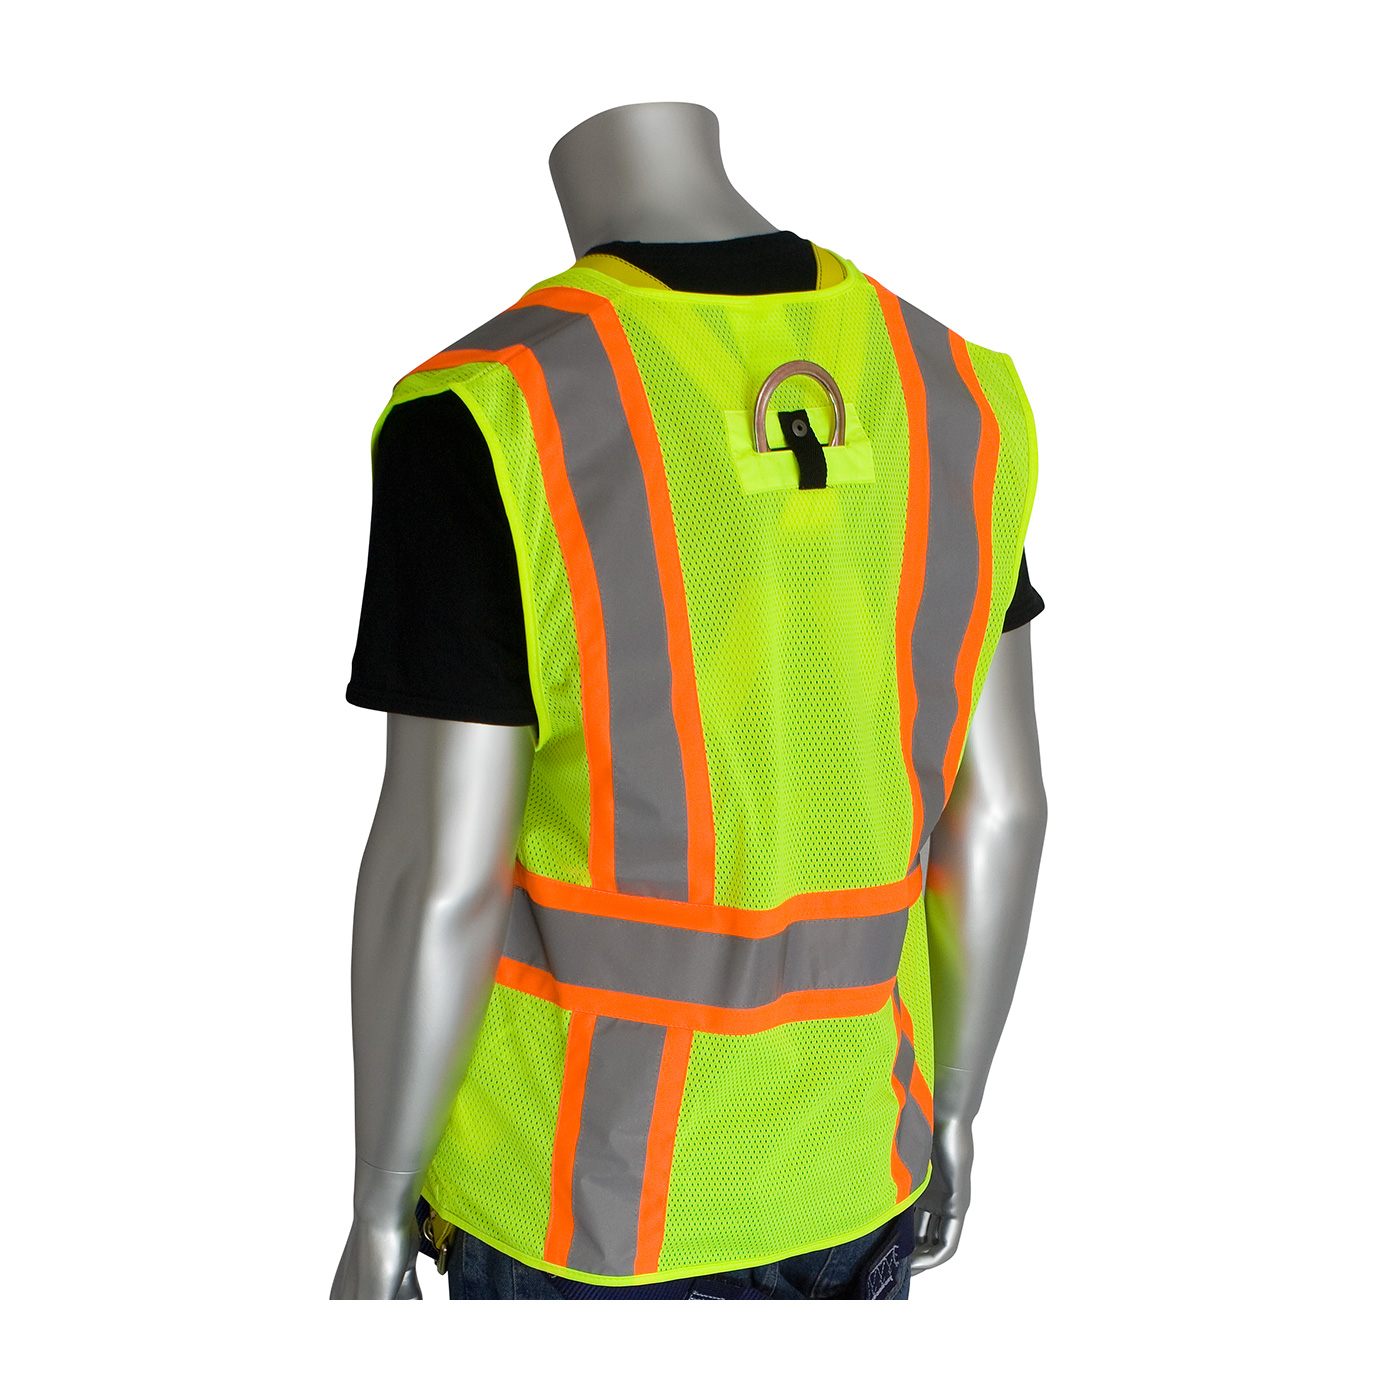 PIP® Type/Class R2 Two-Tone D-Ring Mesh Vests #302-0600D-LY